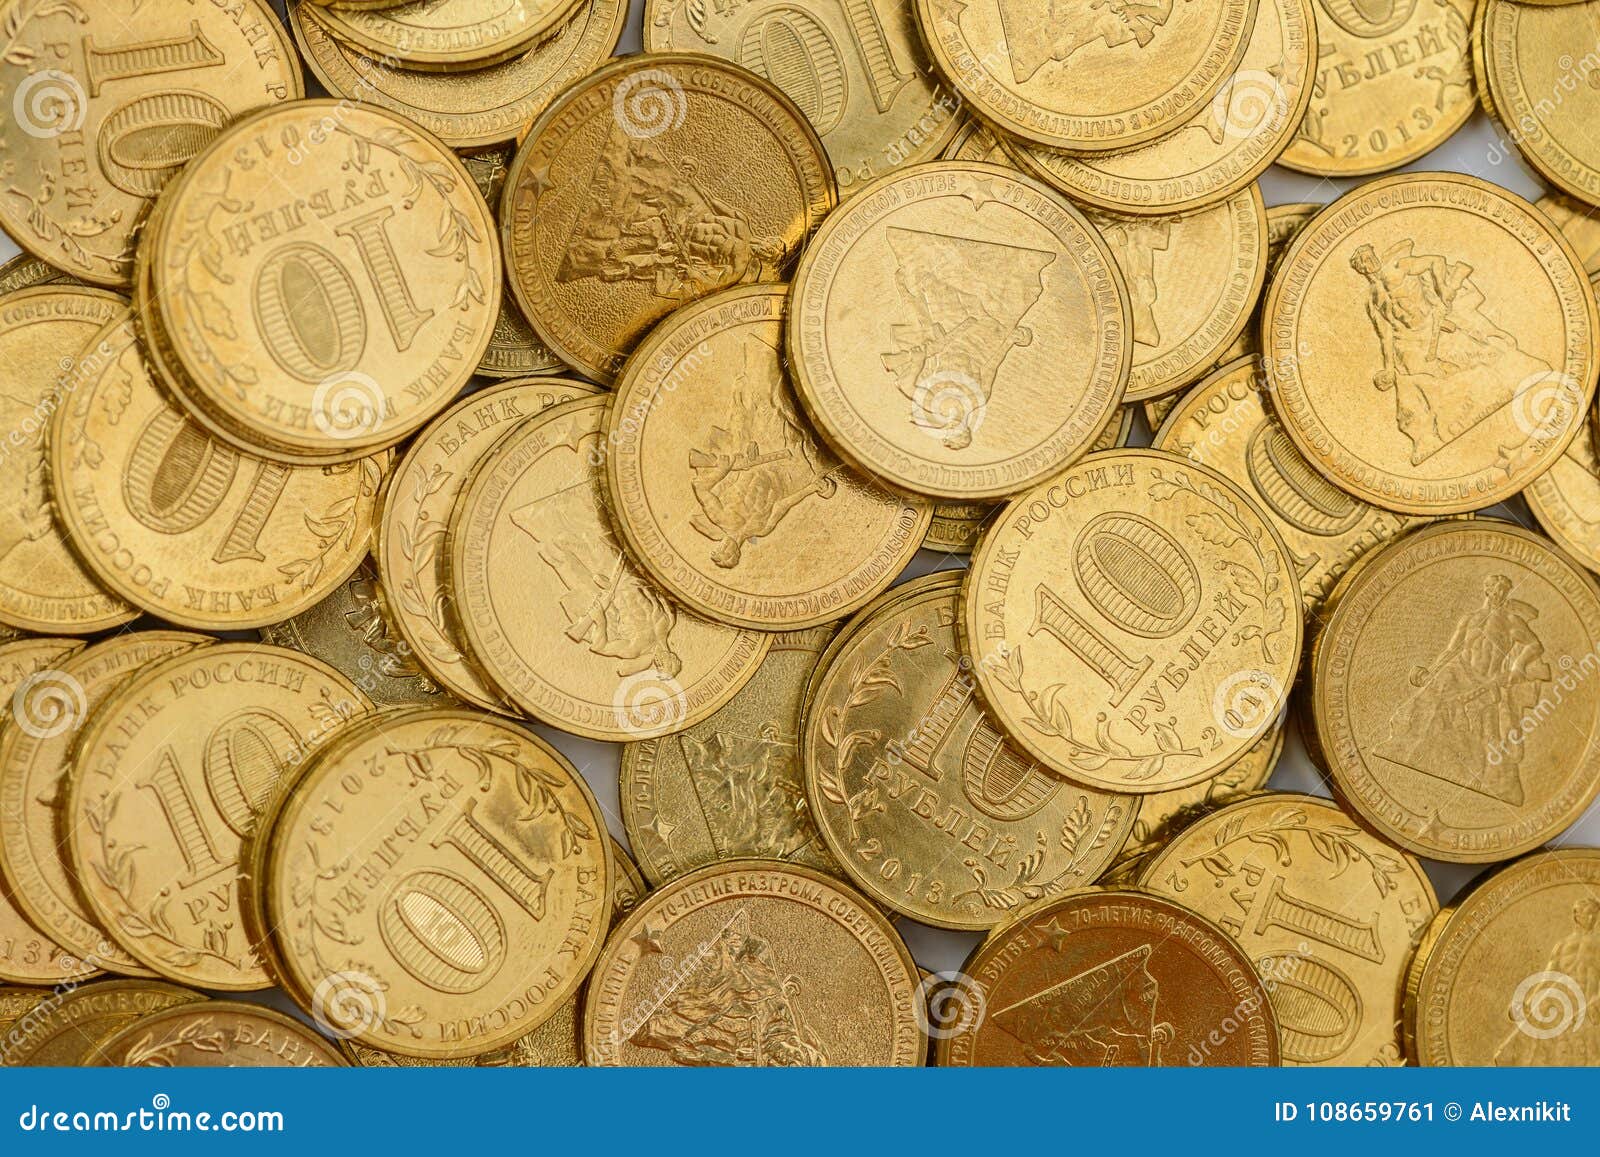 5+ Thousand Coin Collection Rare Royalty-Free Images, Stock Photos &  Pictures